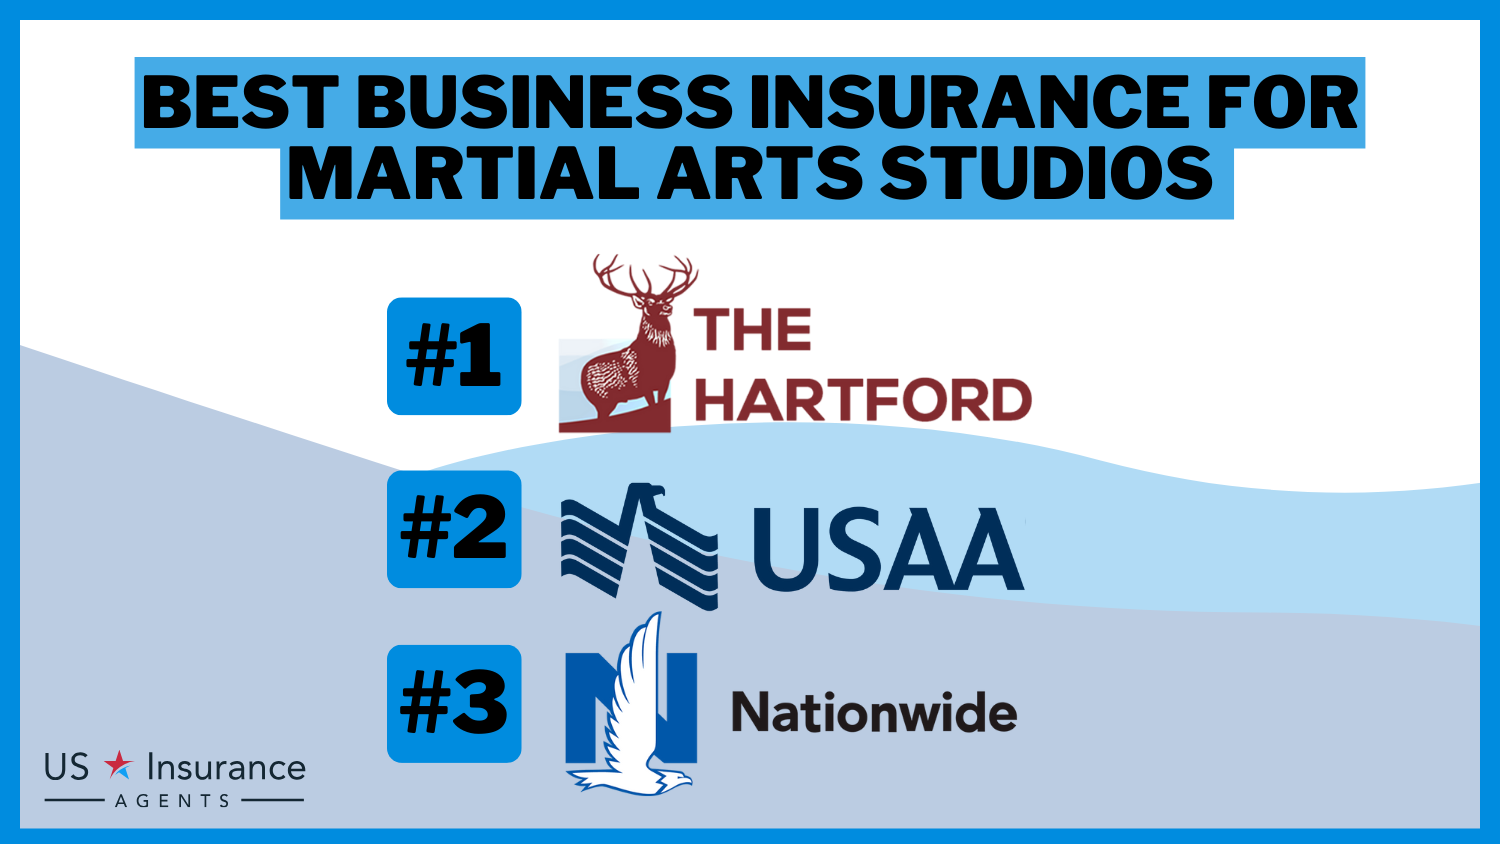 3 Best Business Insurance for Martial Arts Studios: The Hartford, USAA and Nationwide.